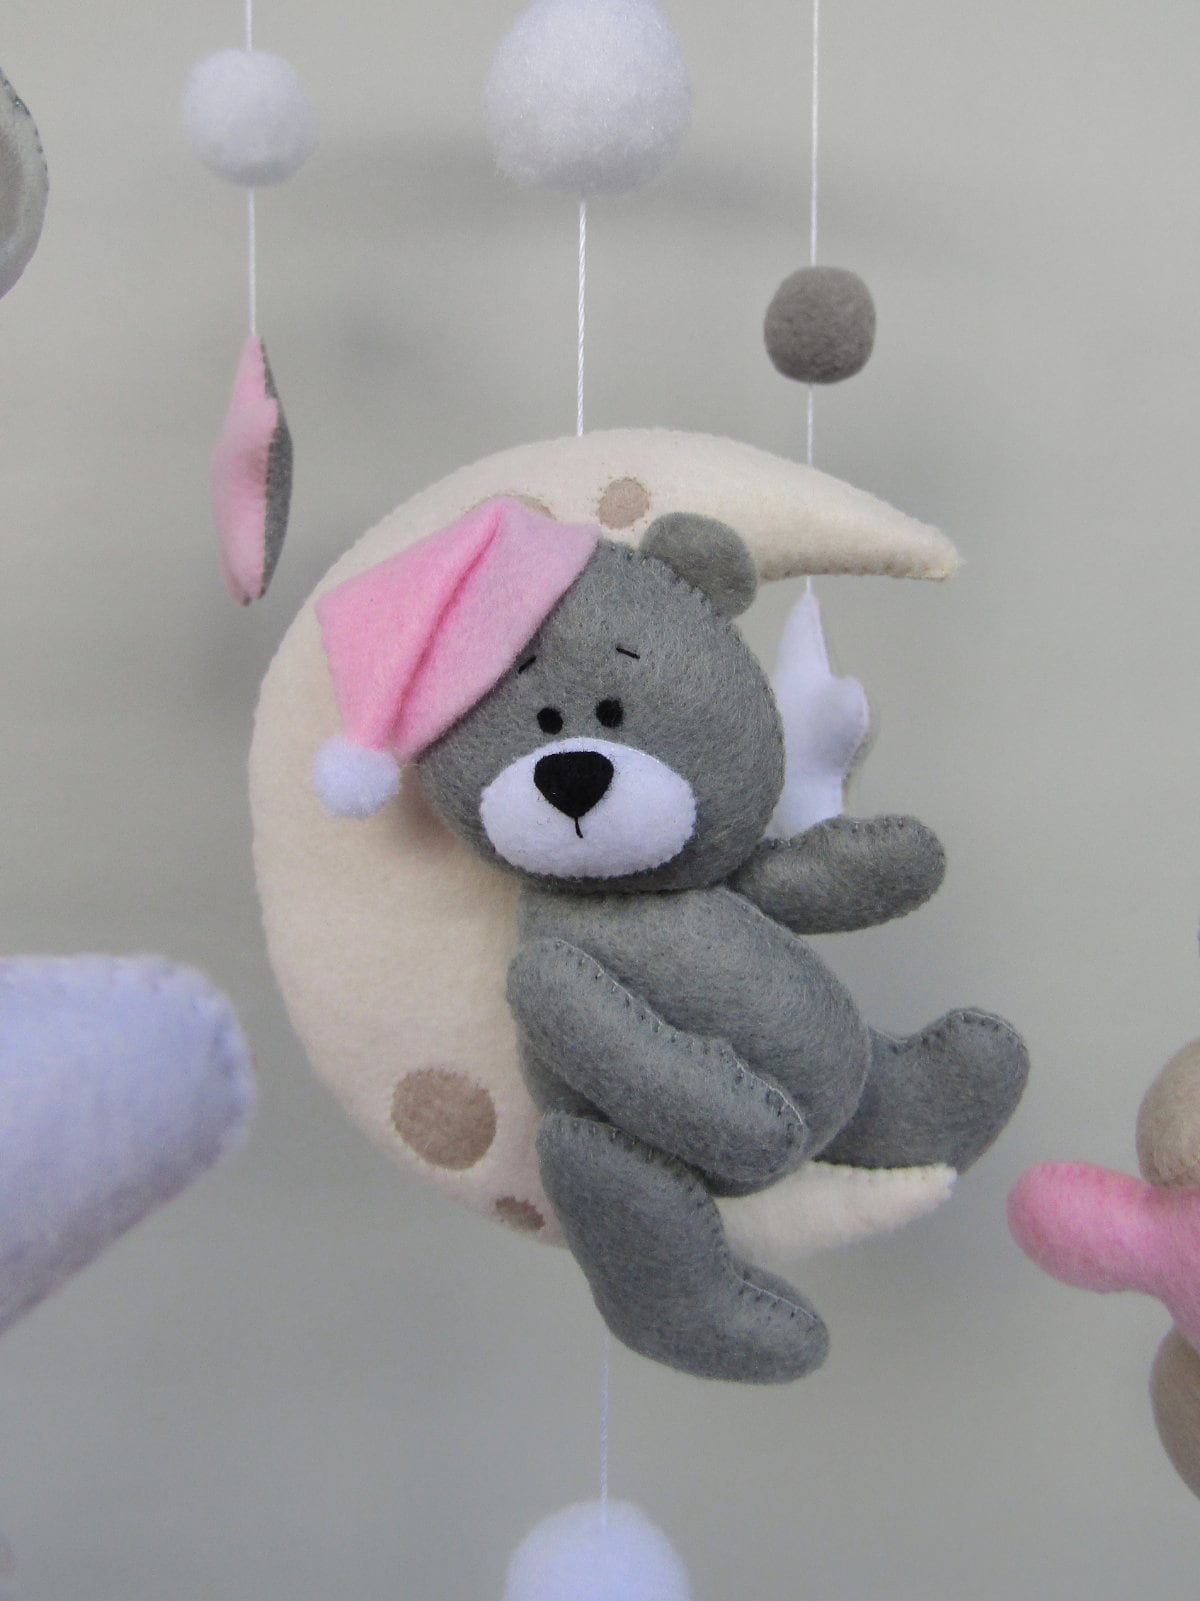 Baby Girl Crib Mobile With Bears Gray and Beige, Pink Cloud, Stars